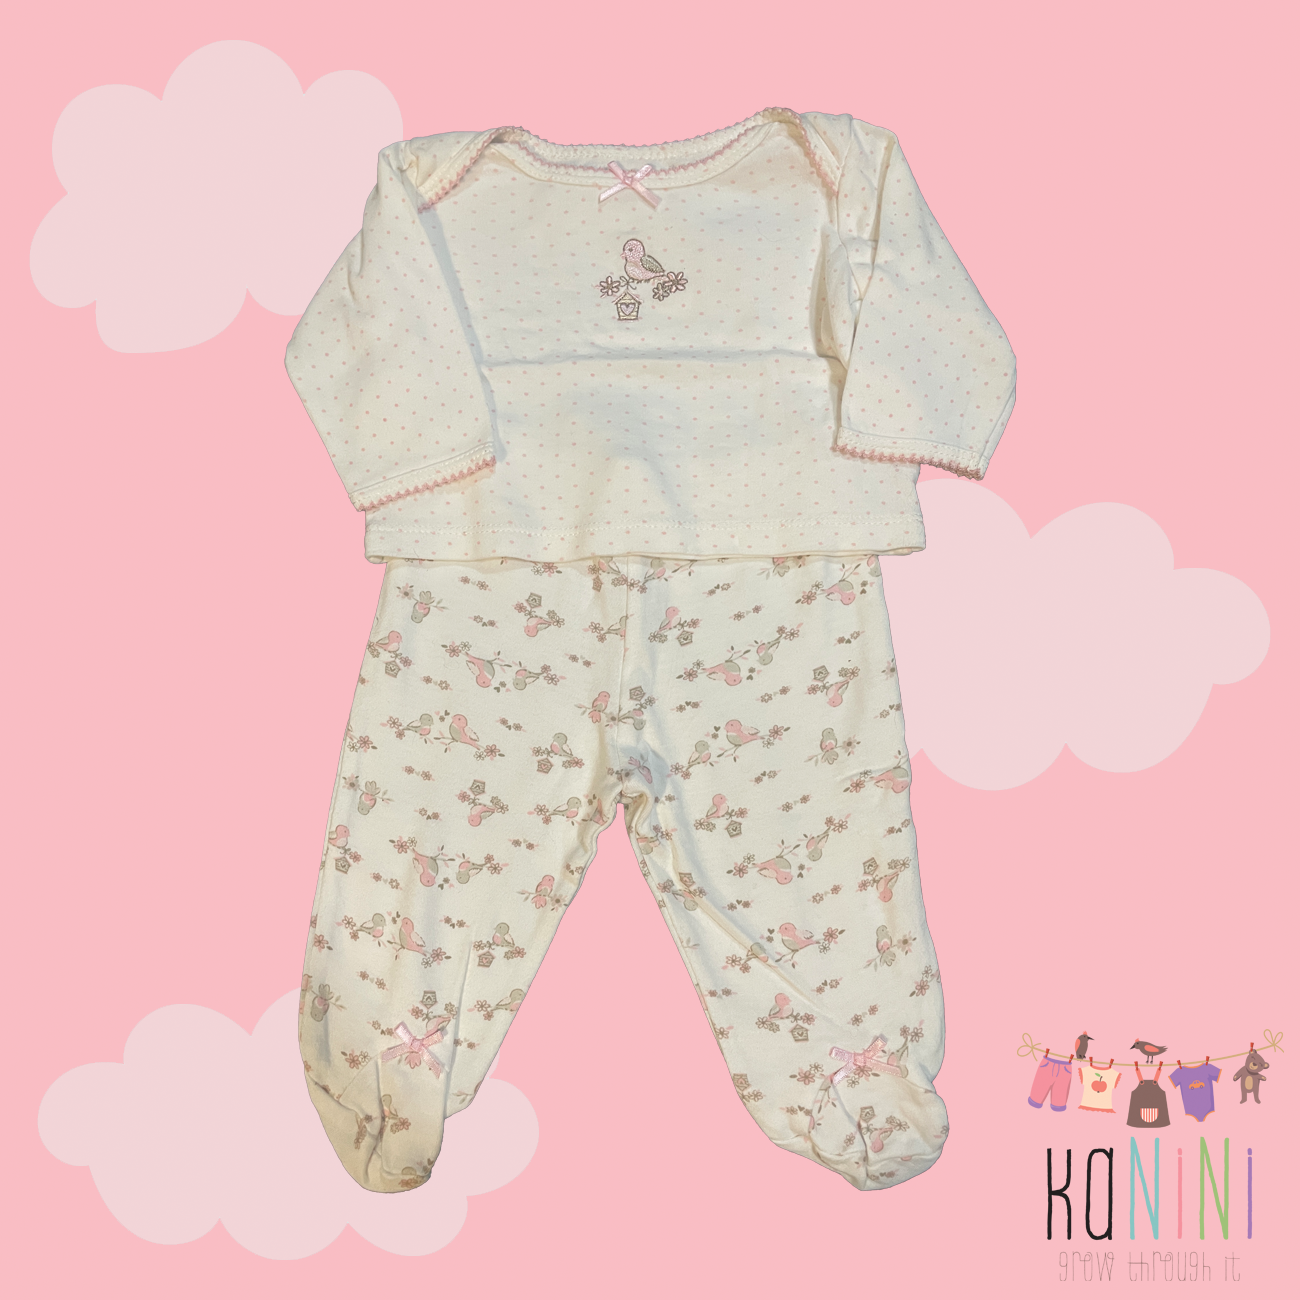 Featured image for “Little Me 3 Months Girls Polkadot Set”